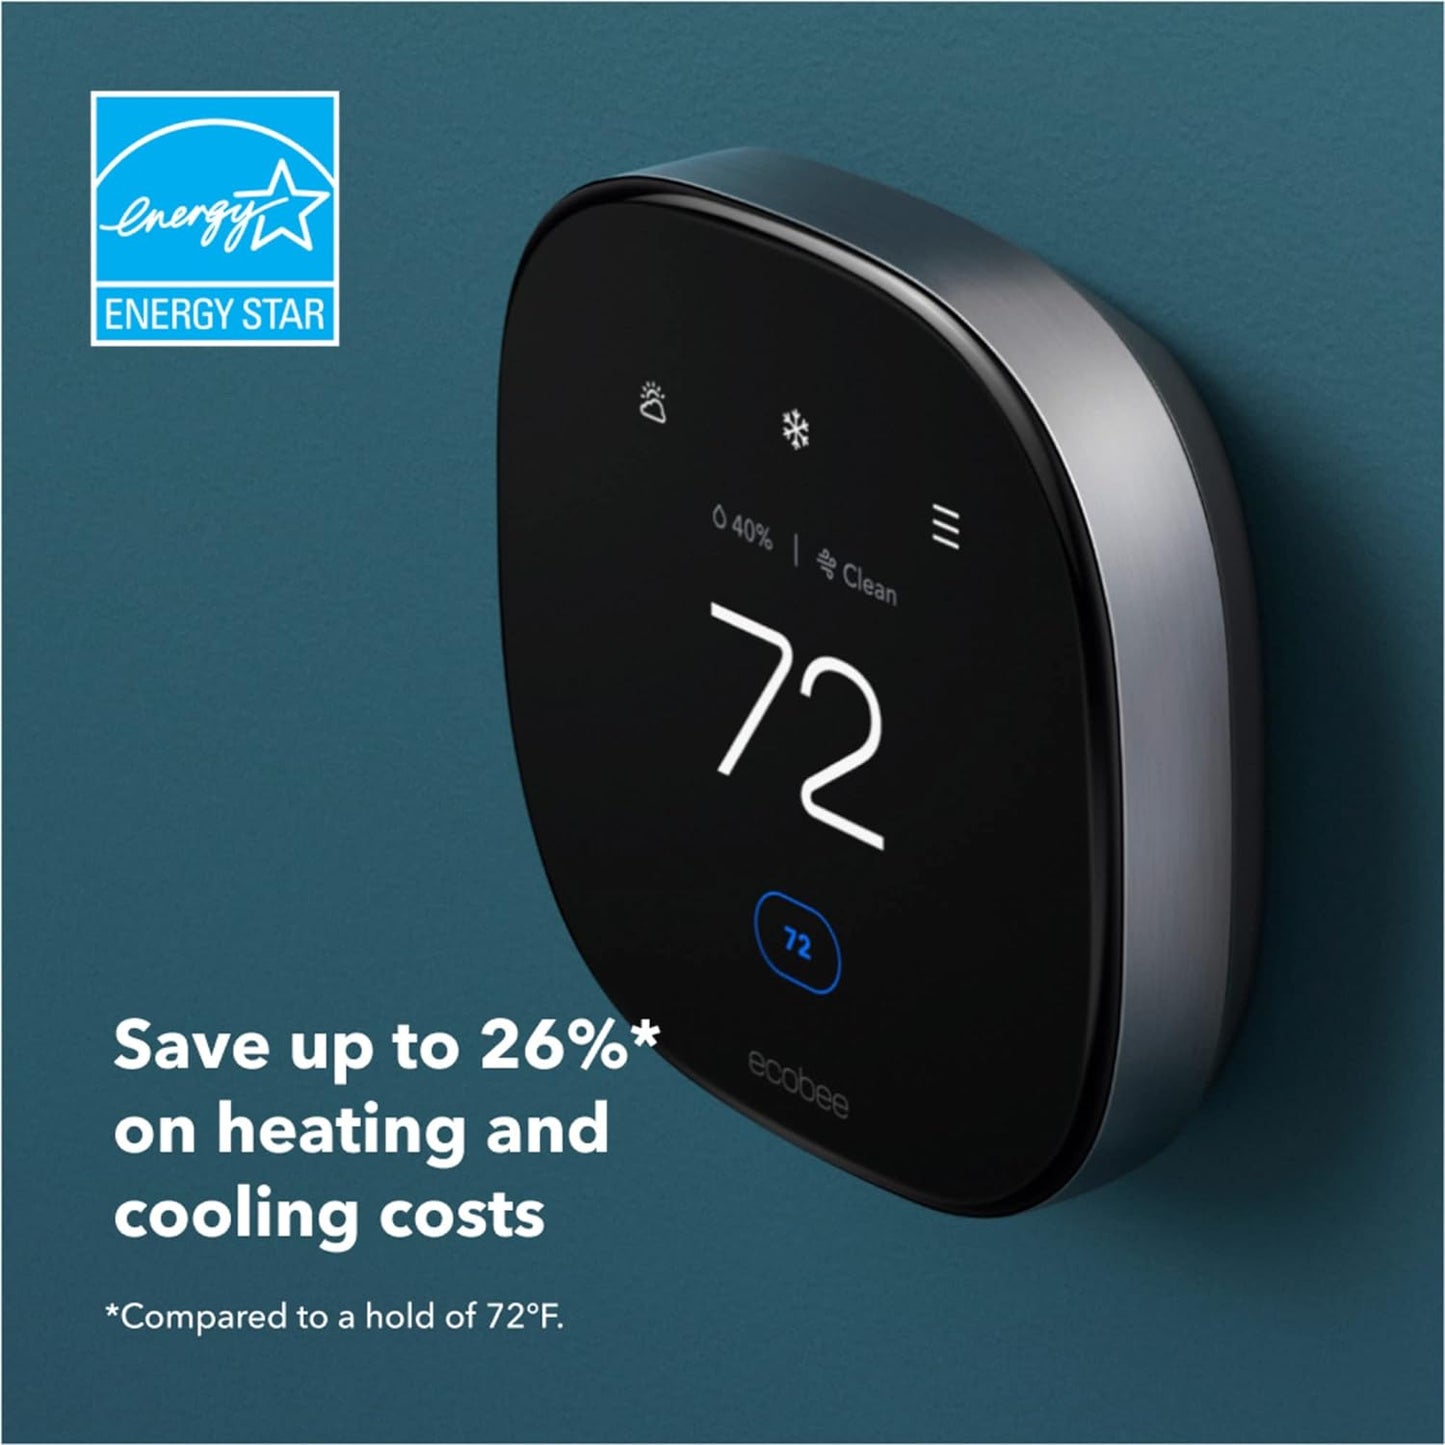 Ecobee Smart Thermostat Premium with Smart Sensor and Air Quality Monitor Works with Siri, Alexa, Google Assistant